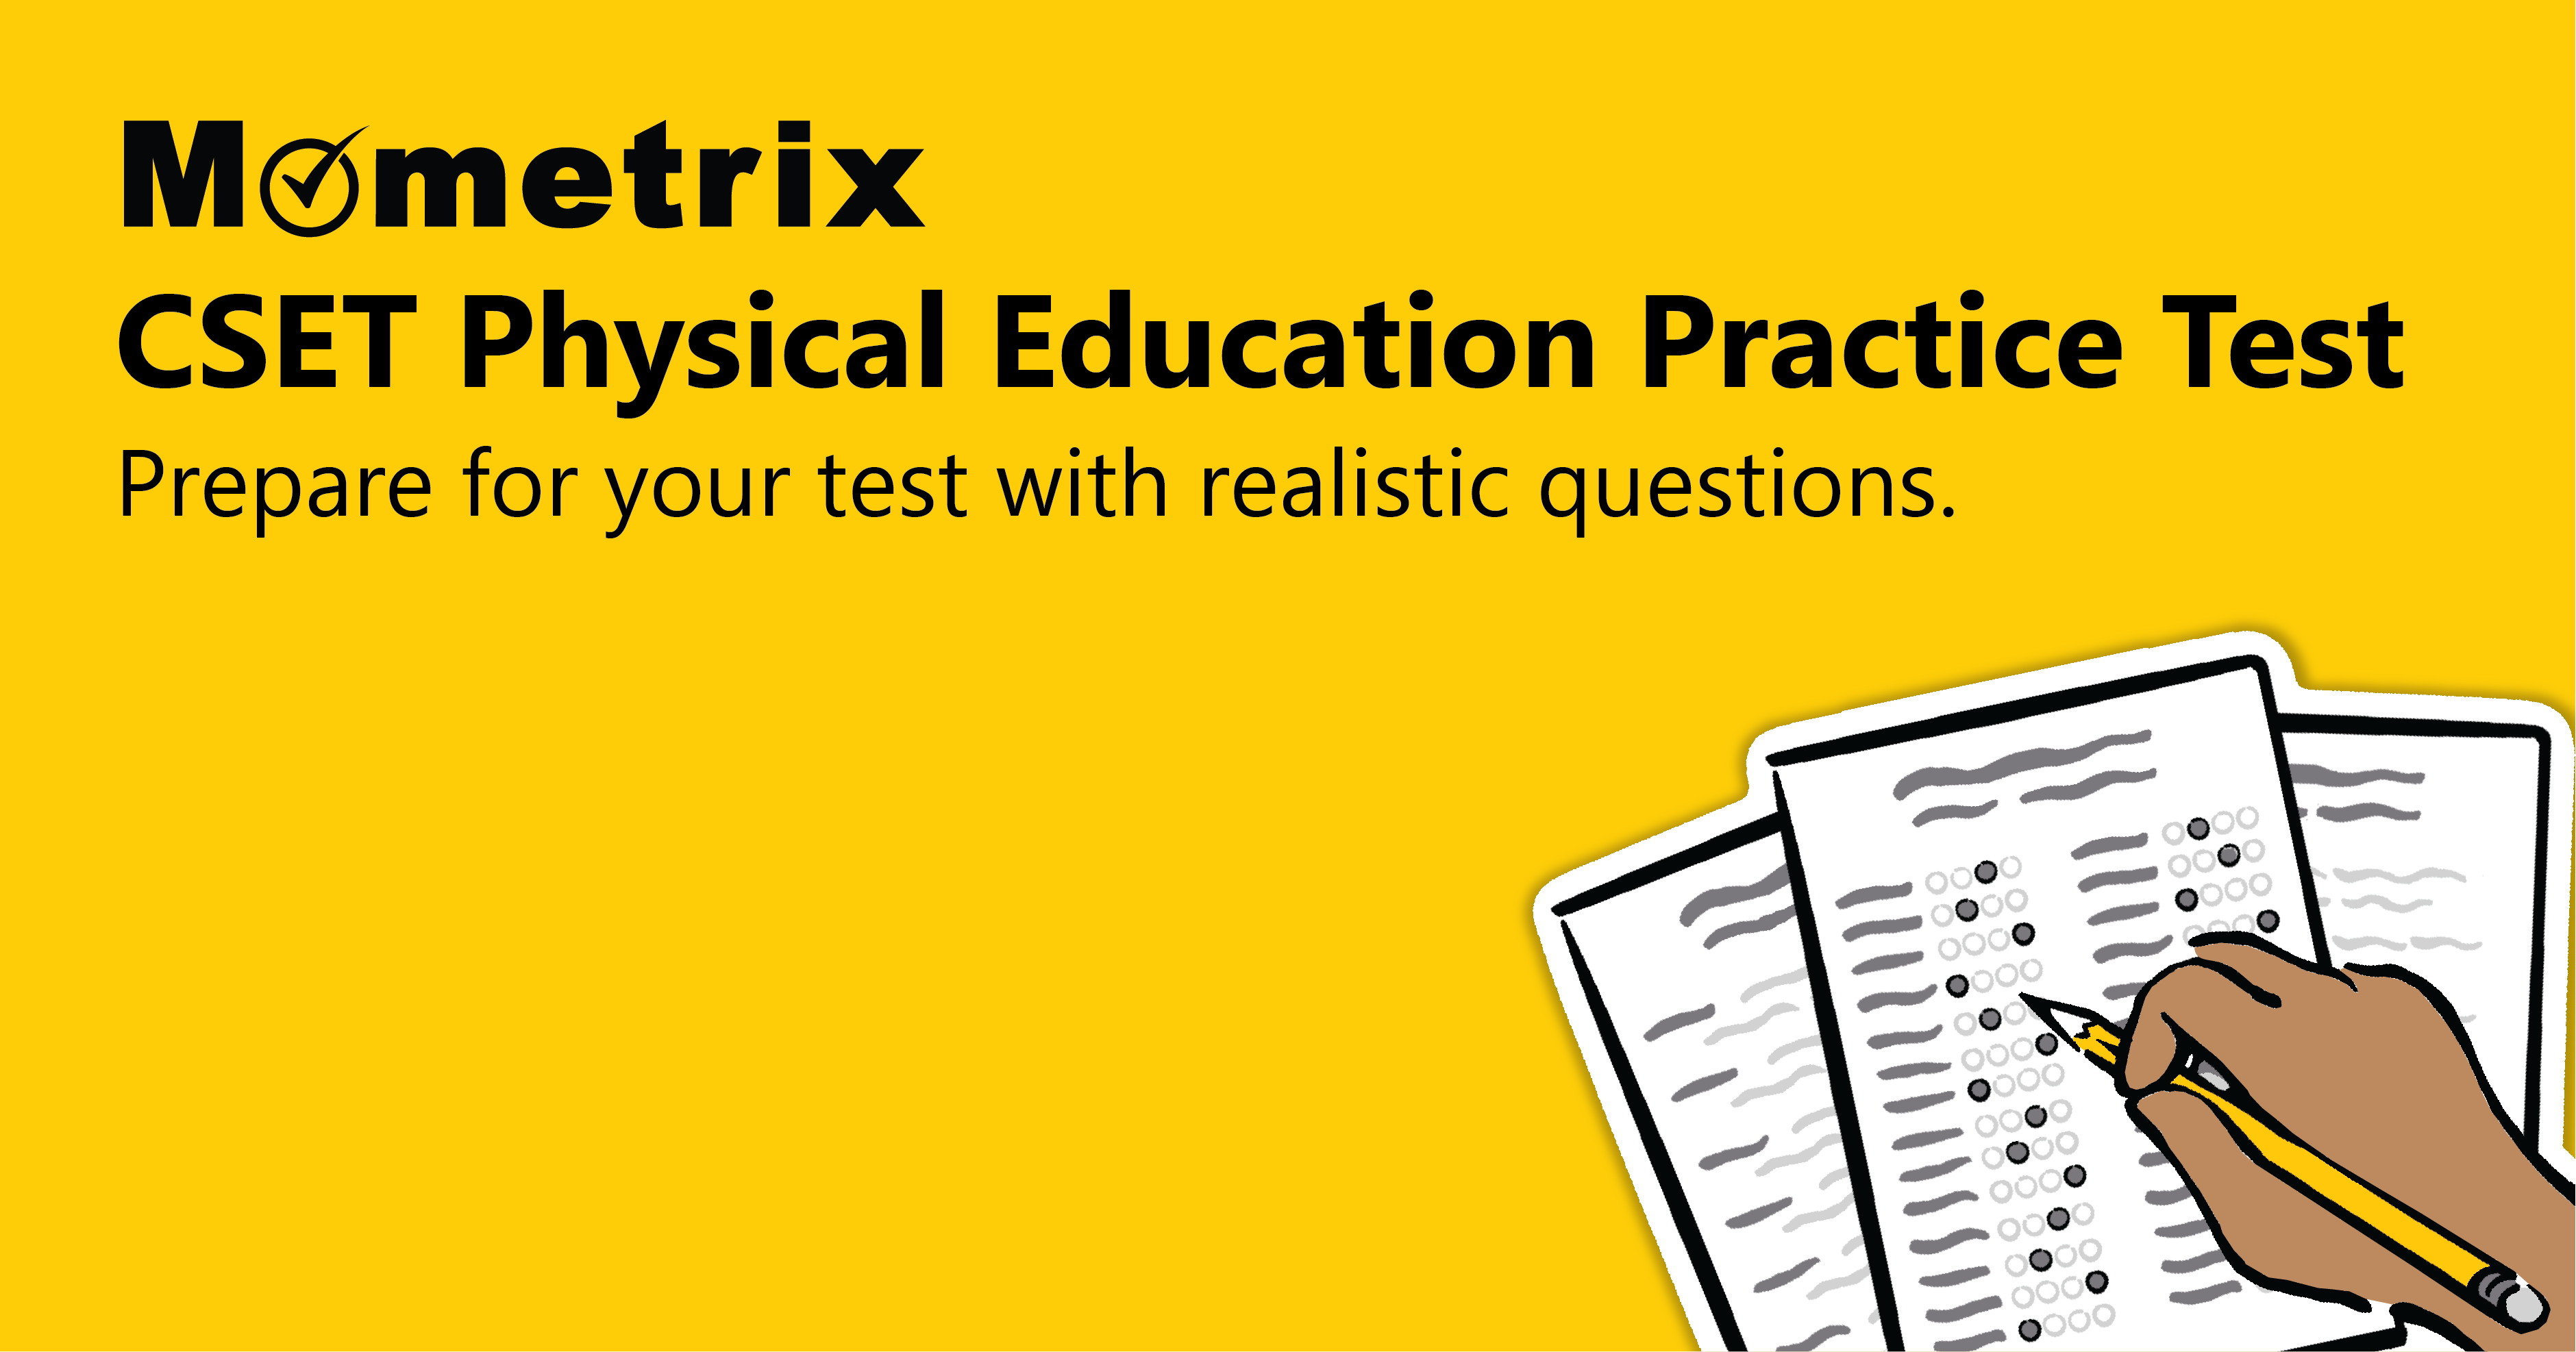 Yellow graphic promoting Mometrix CSET Physical Education Practice Test, featuring a hand filling out a multiple-choice test sheet. Text reads: "Prepare for your test with realistic questions.